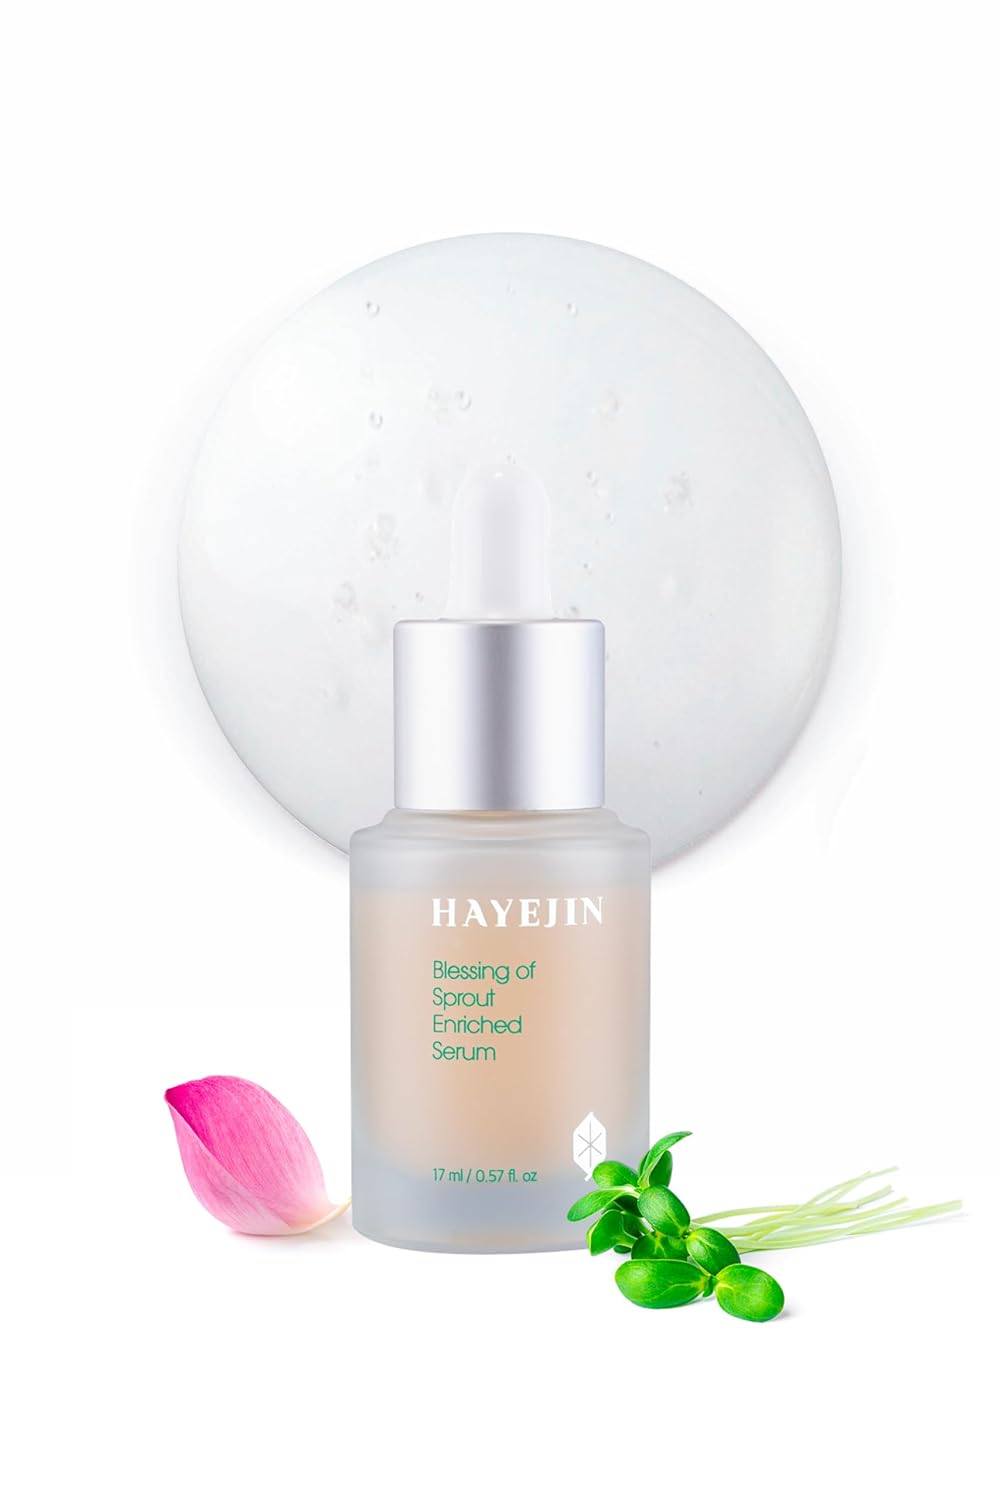 HAYEJIN Blessing of Sprout Radiance Enriched Serum, 30ml, 1.01 fl.oz